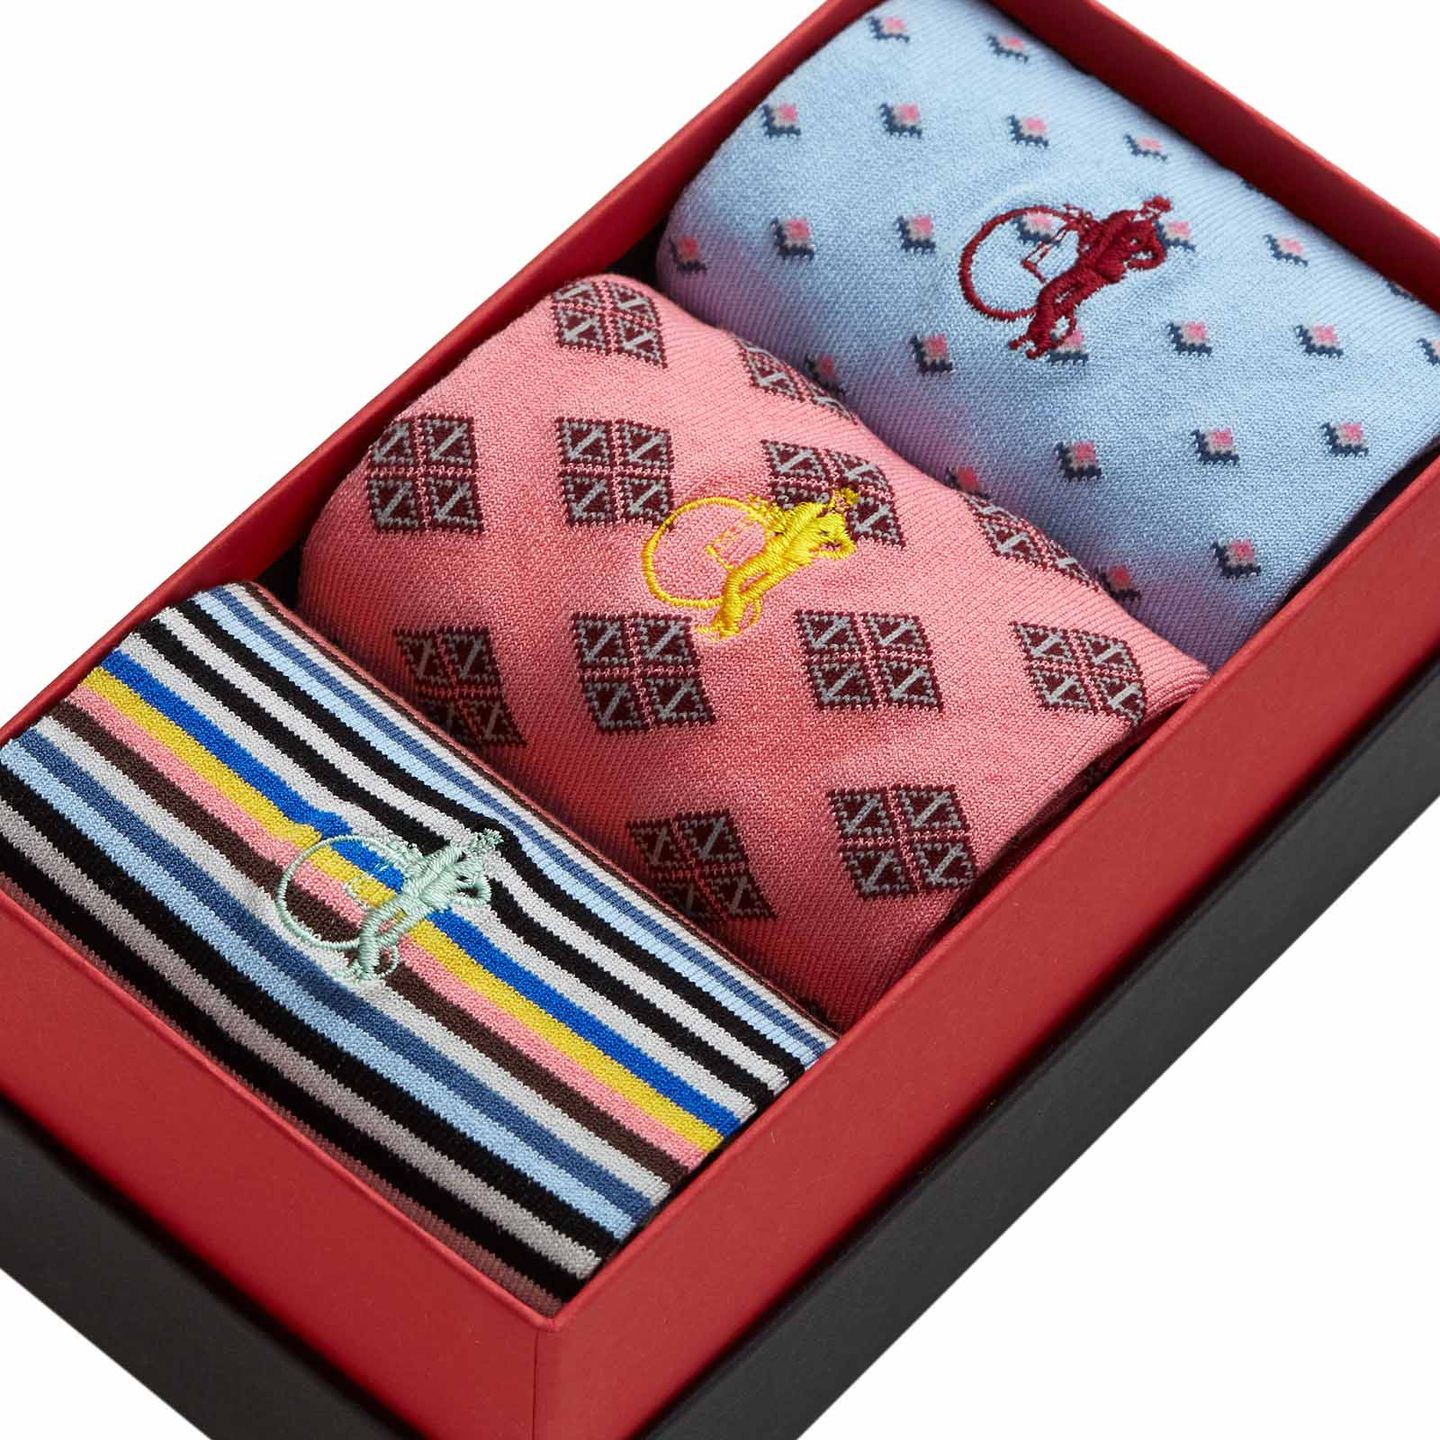 Close up of a presentation box with 3 pairs of diamond and stripped patterned socks